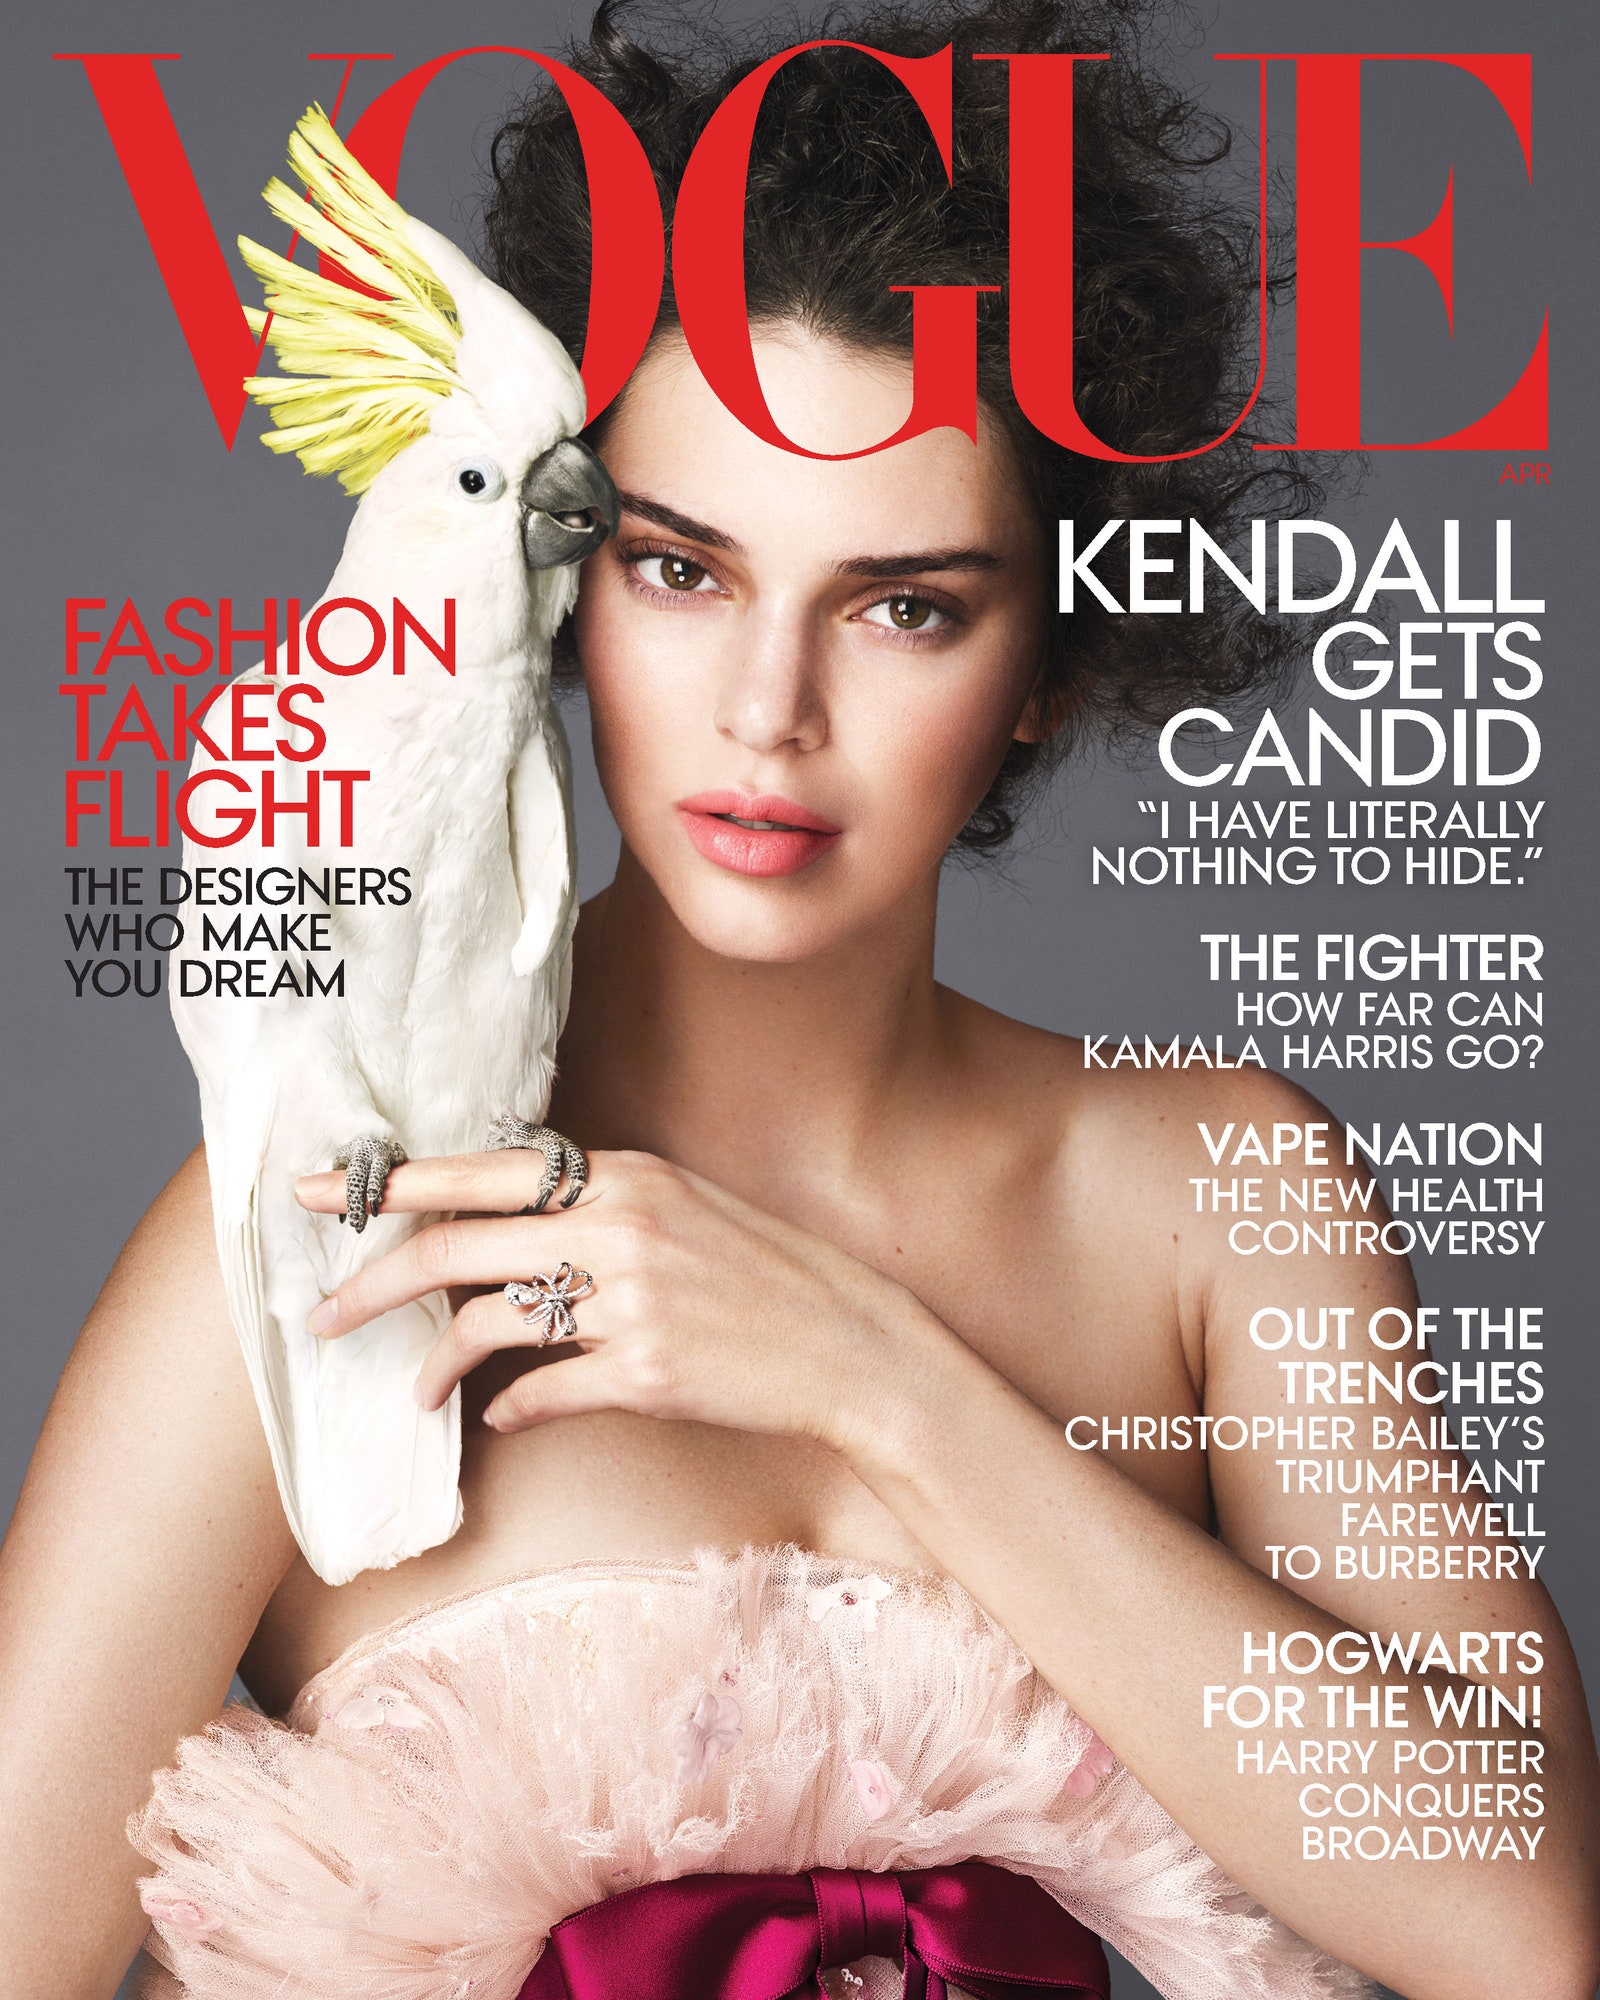 Kendall Jenner Vogue Photoshoot 2017 Wallpapers